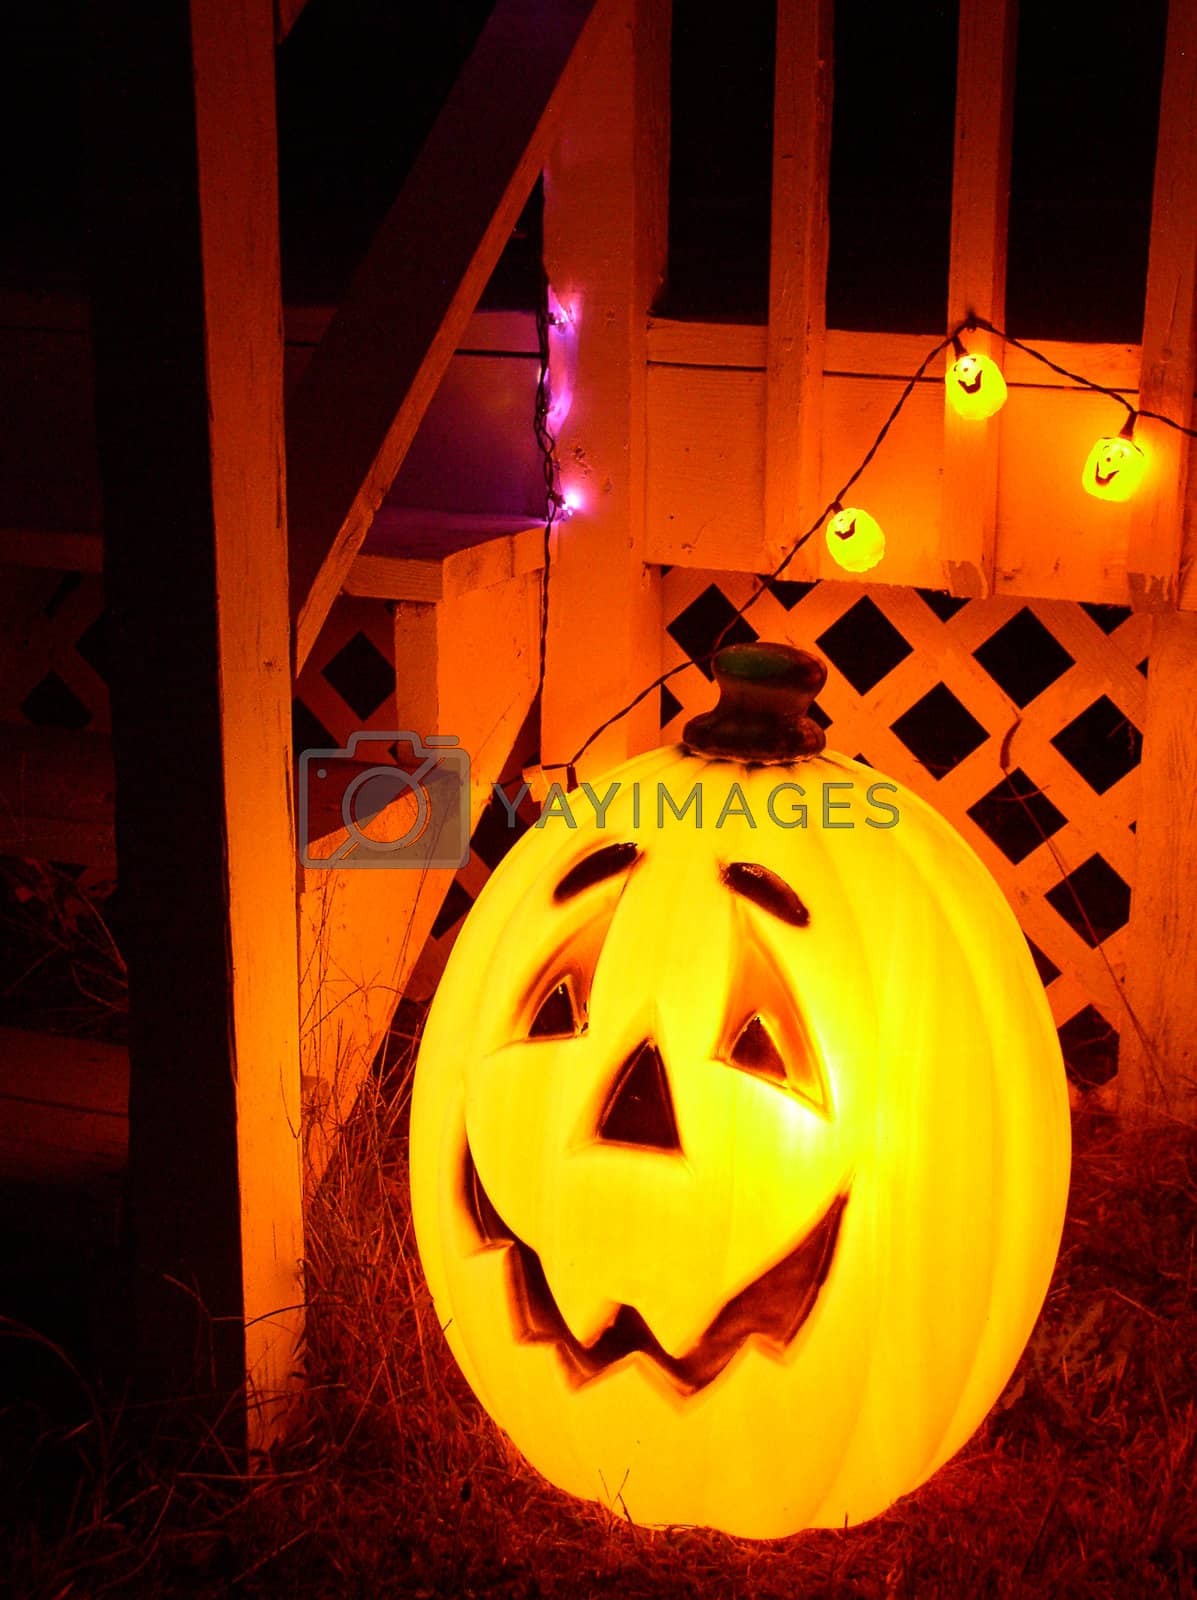 Royalty free image of Halloween Decorations by paulglover